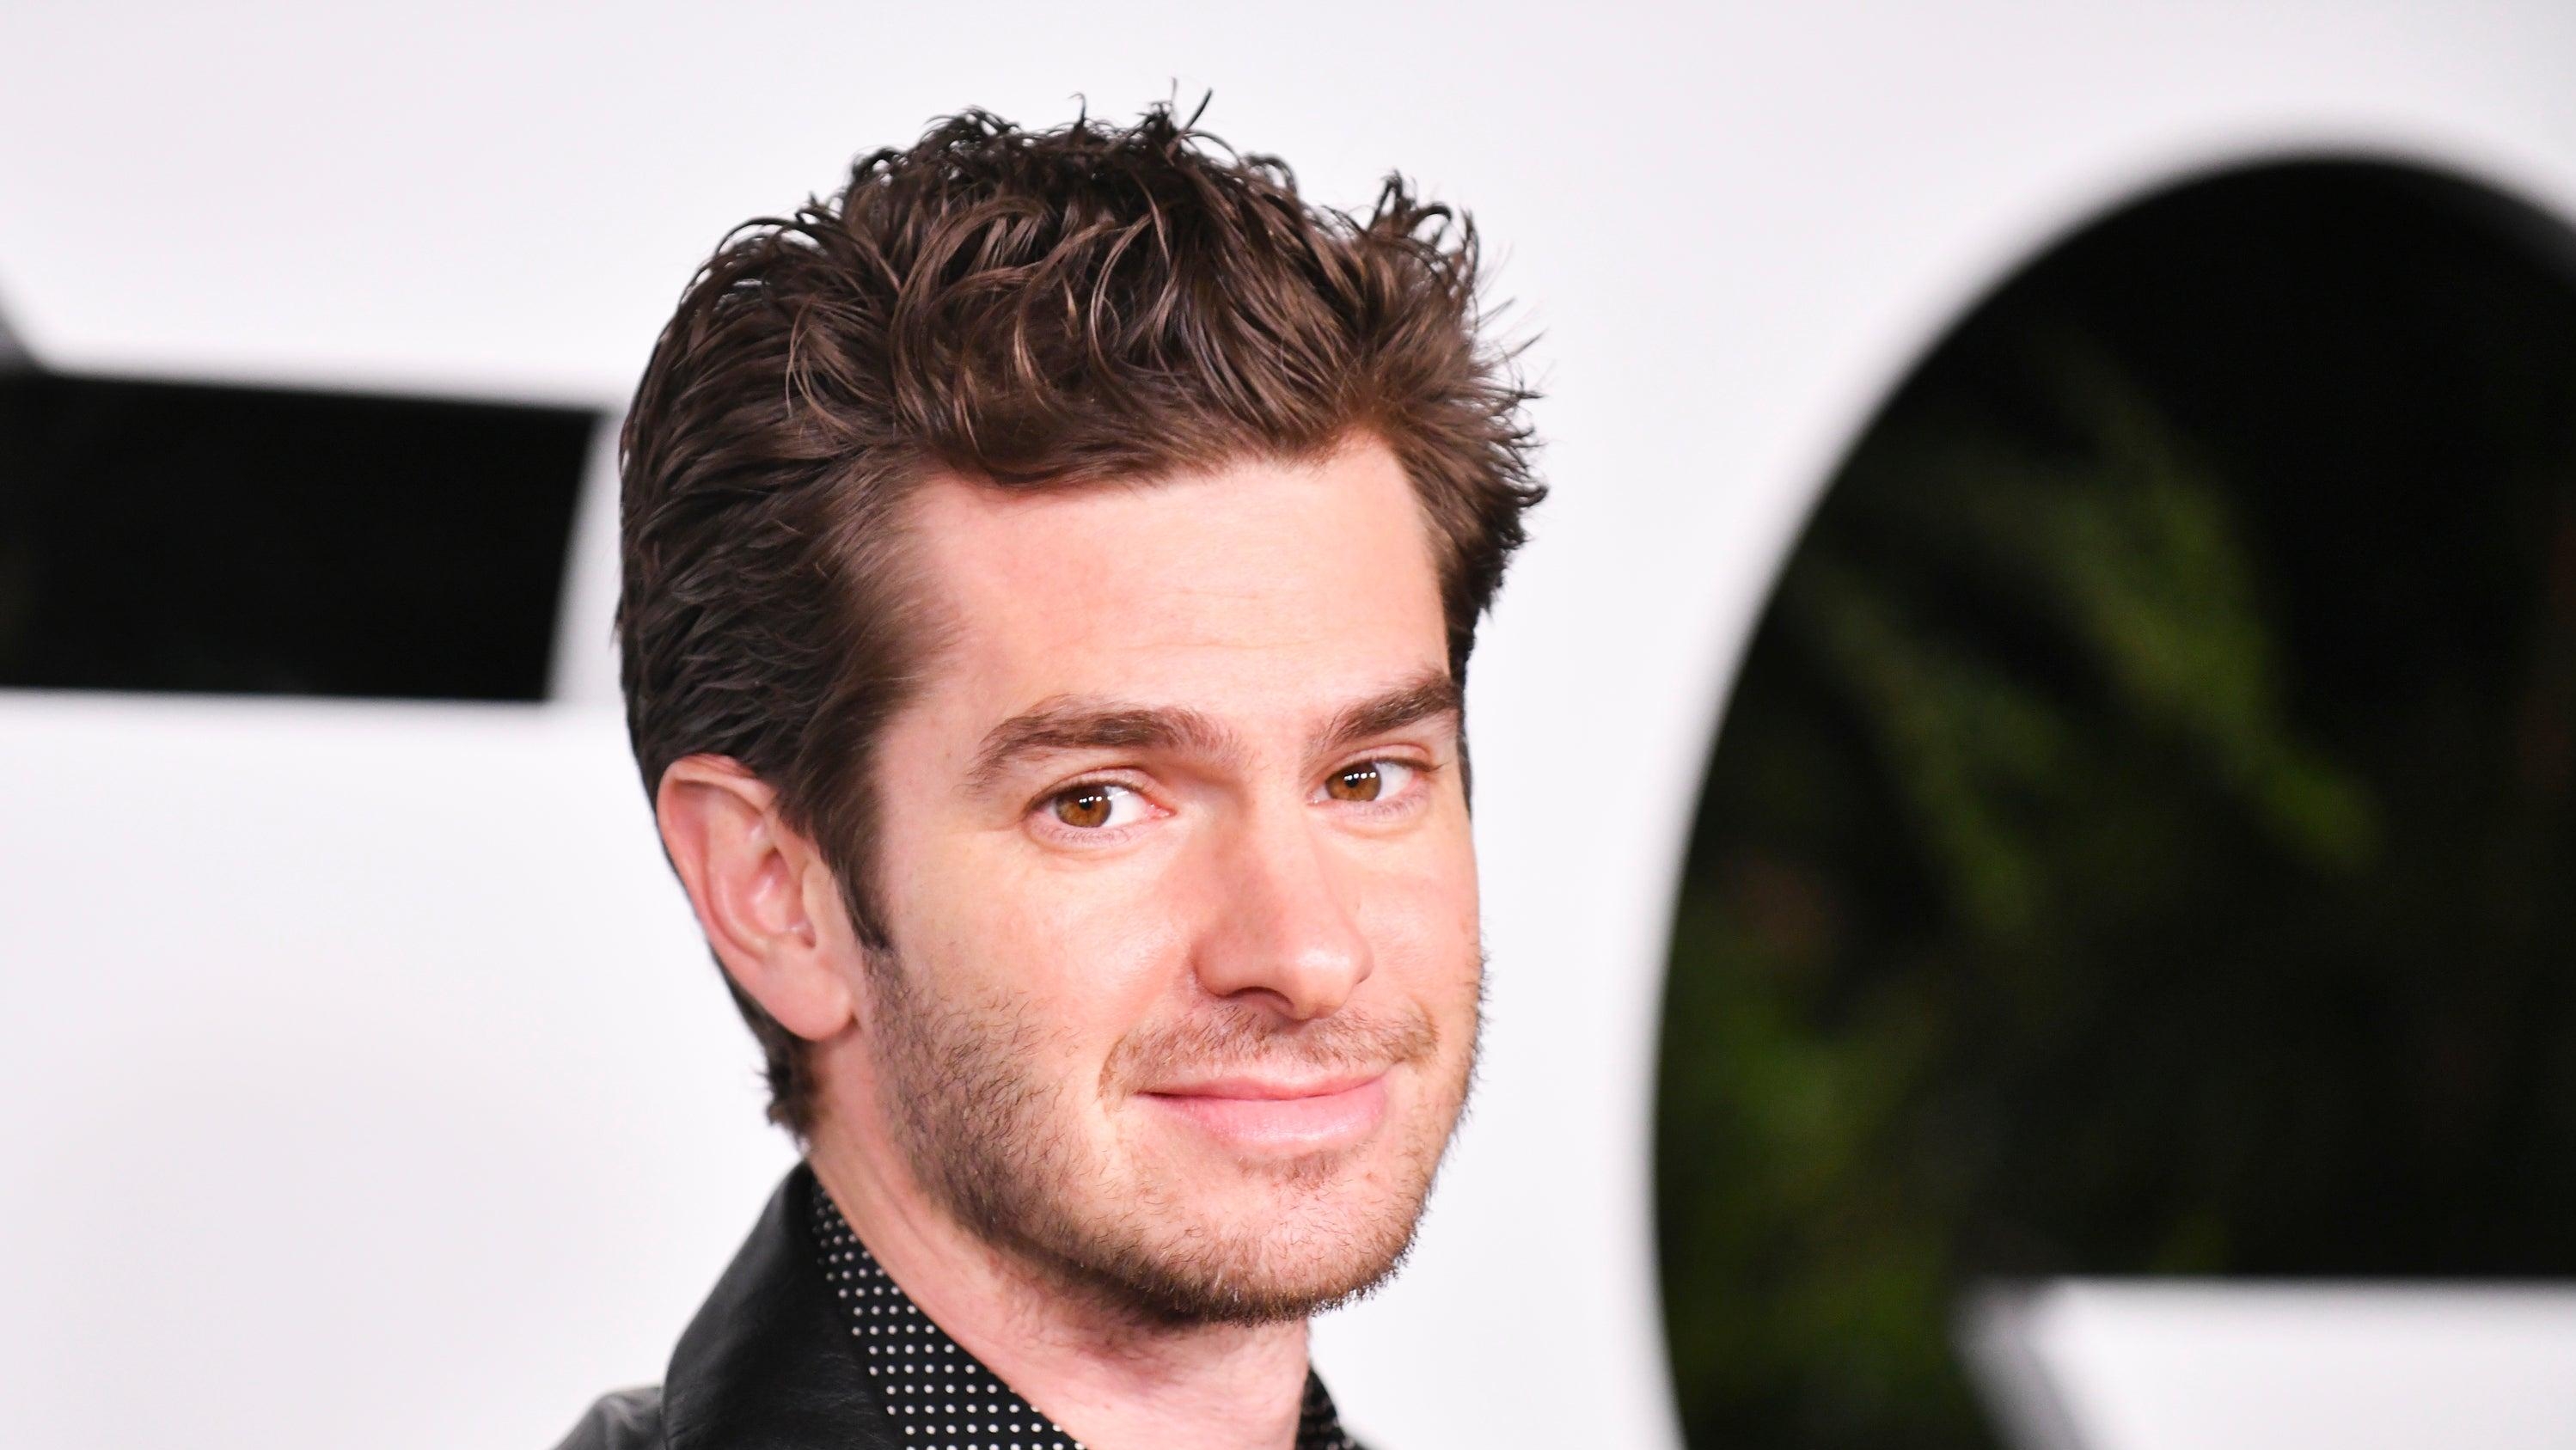 Andrew Garfield wouldn’t say no to playing Spider-Man again